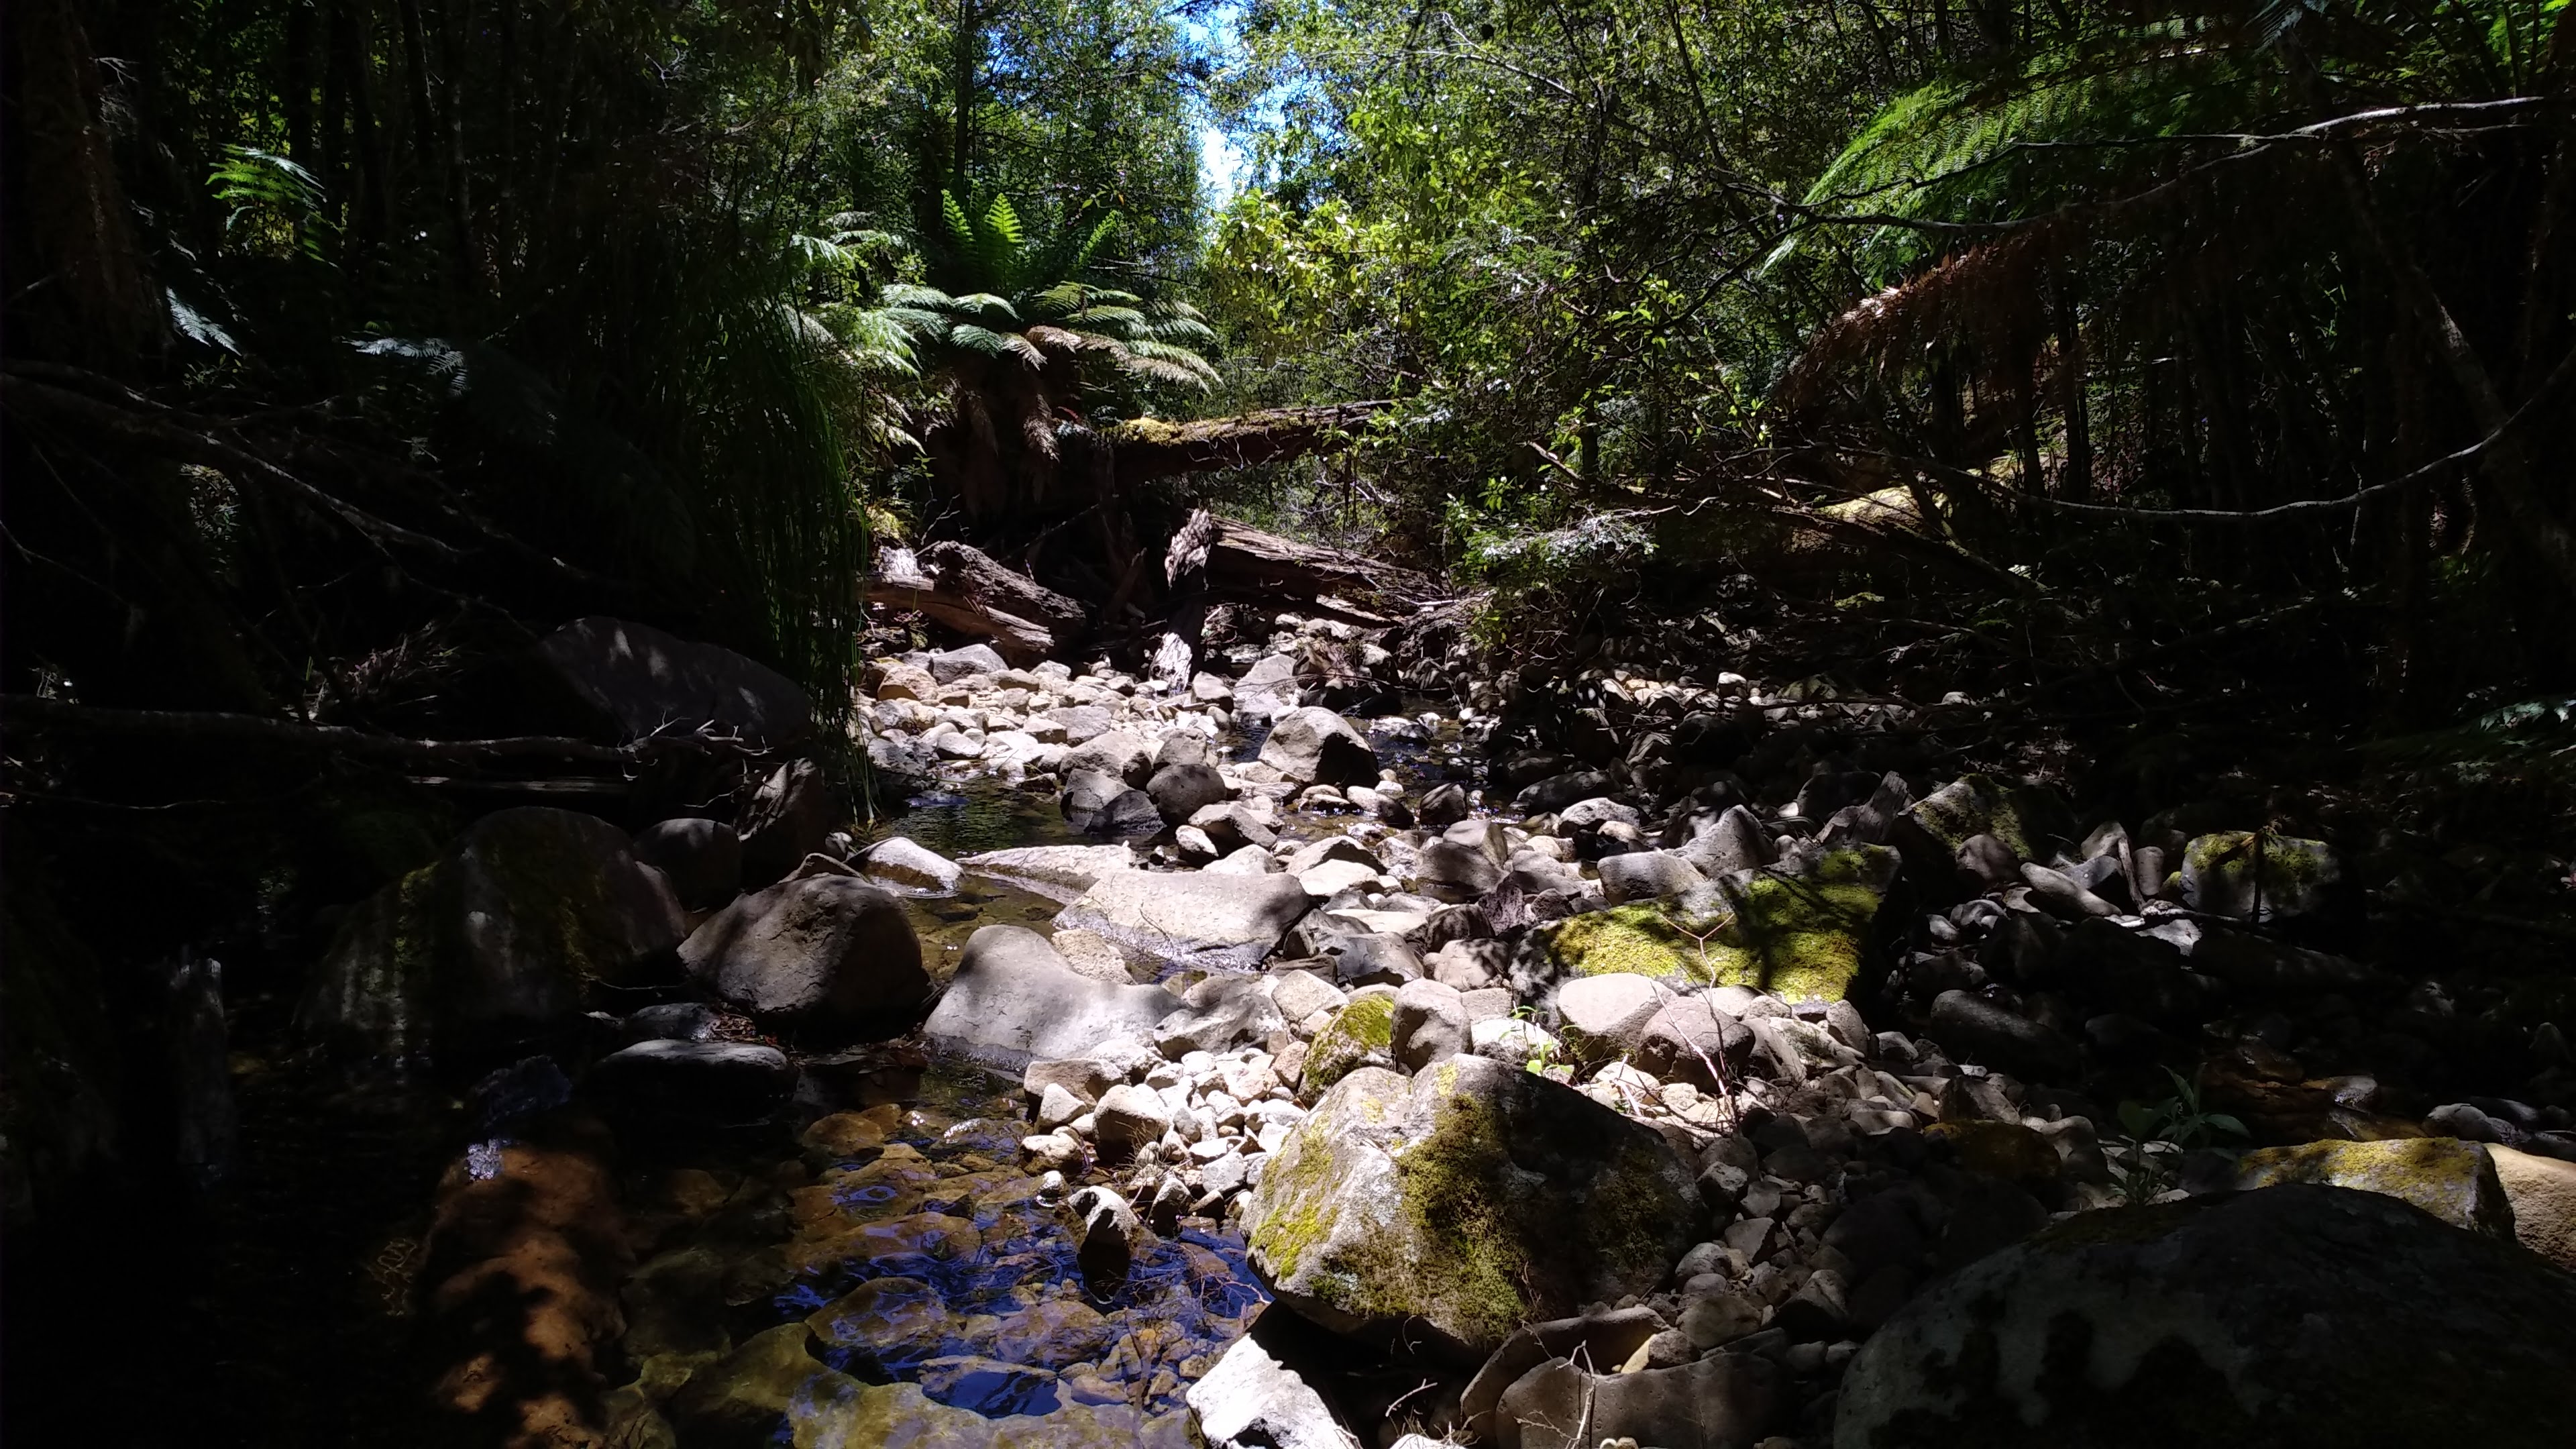 Looking down Sorell Creek after just coming off the Myrtle Forest Trail